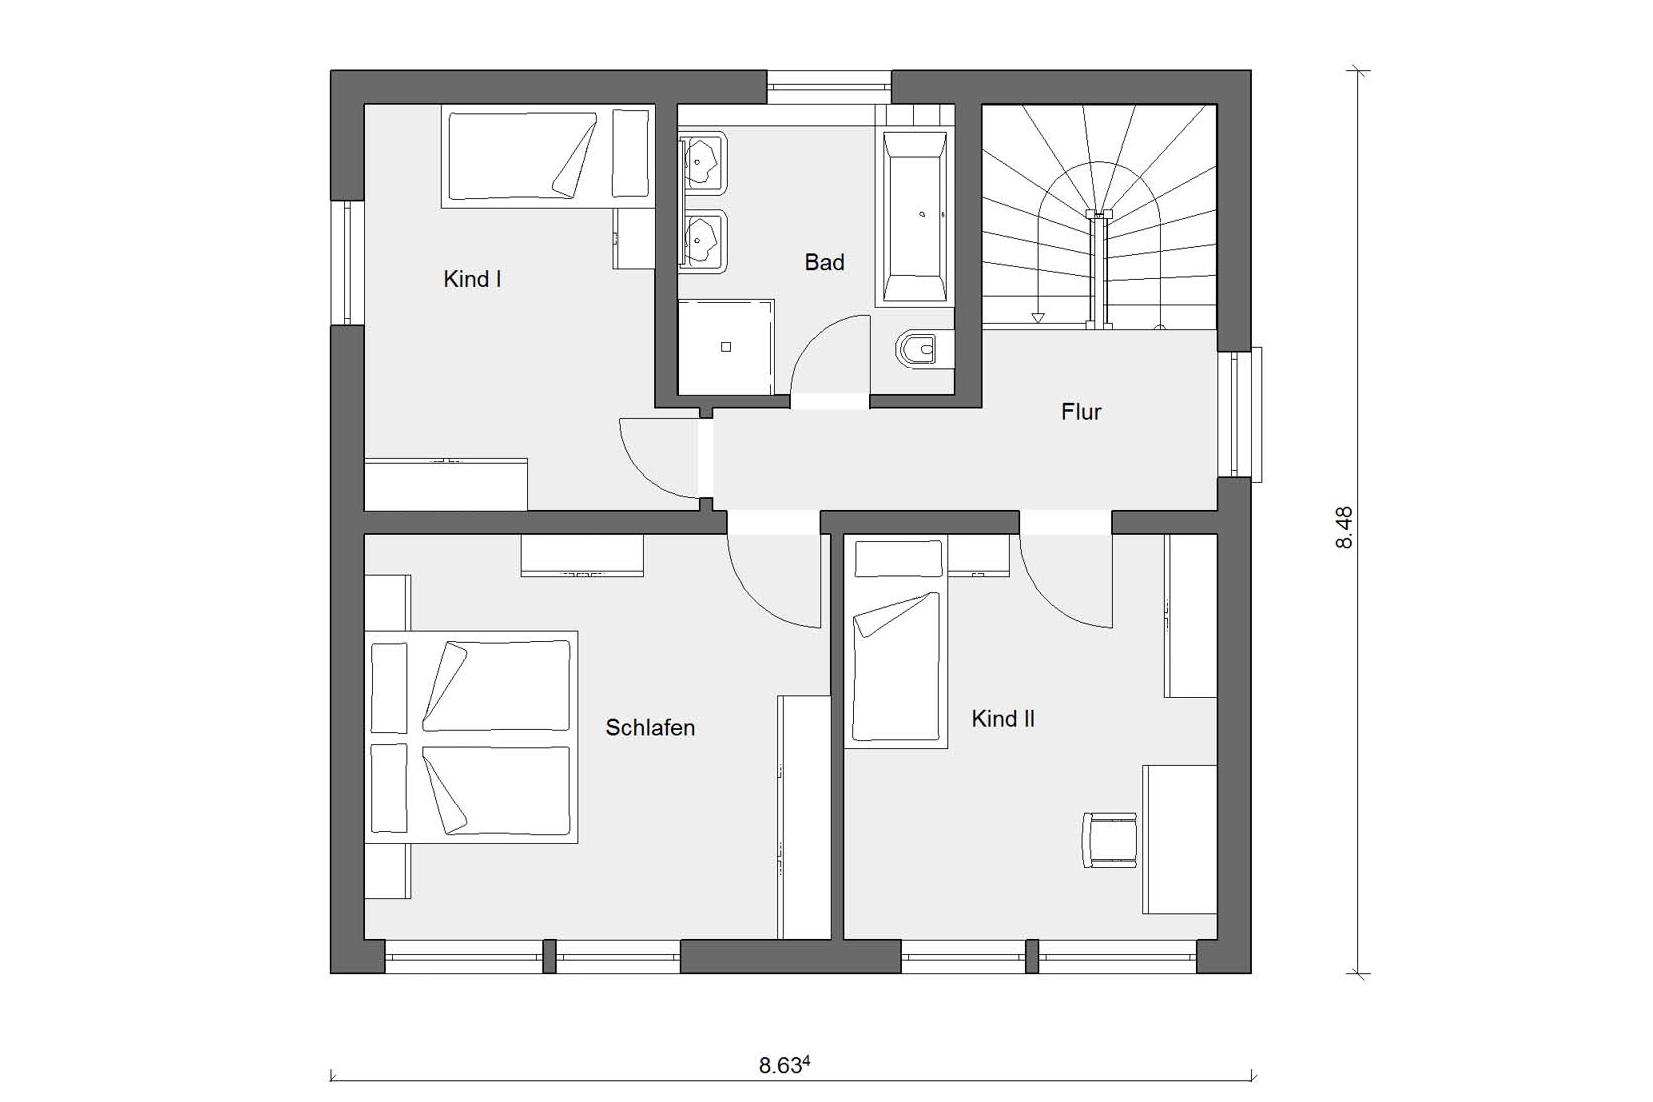 Floor plan attic E 20-118.3 Prefabricated house for 2 persons